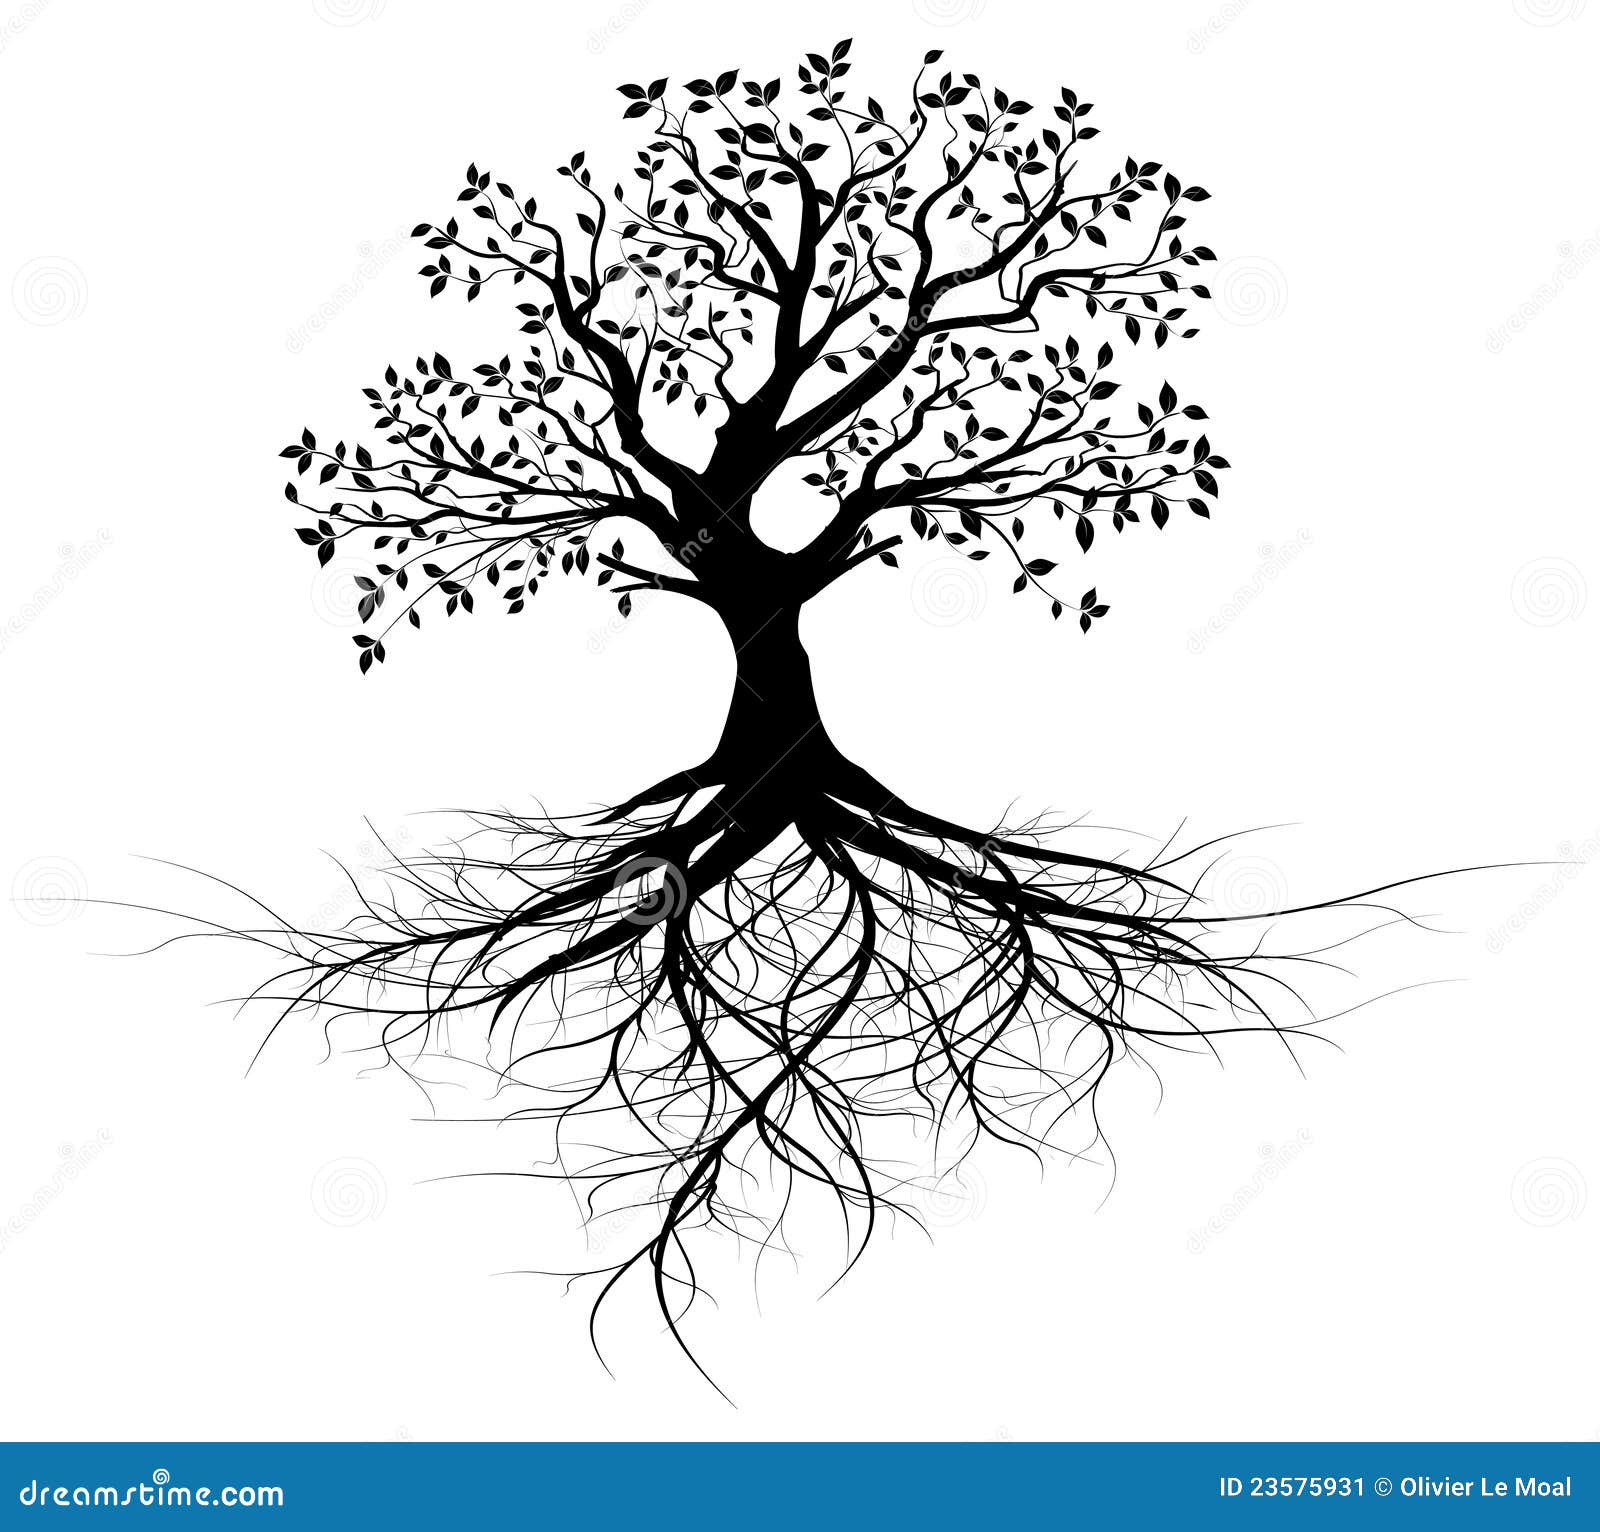 whole black tree with roots - 